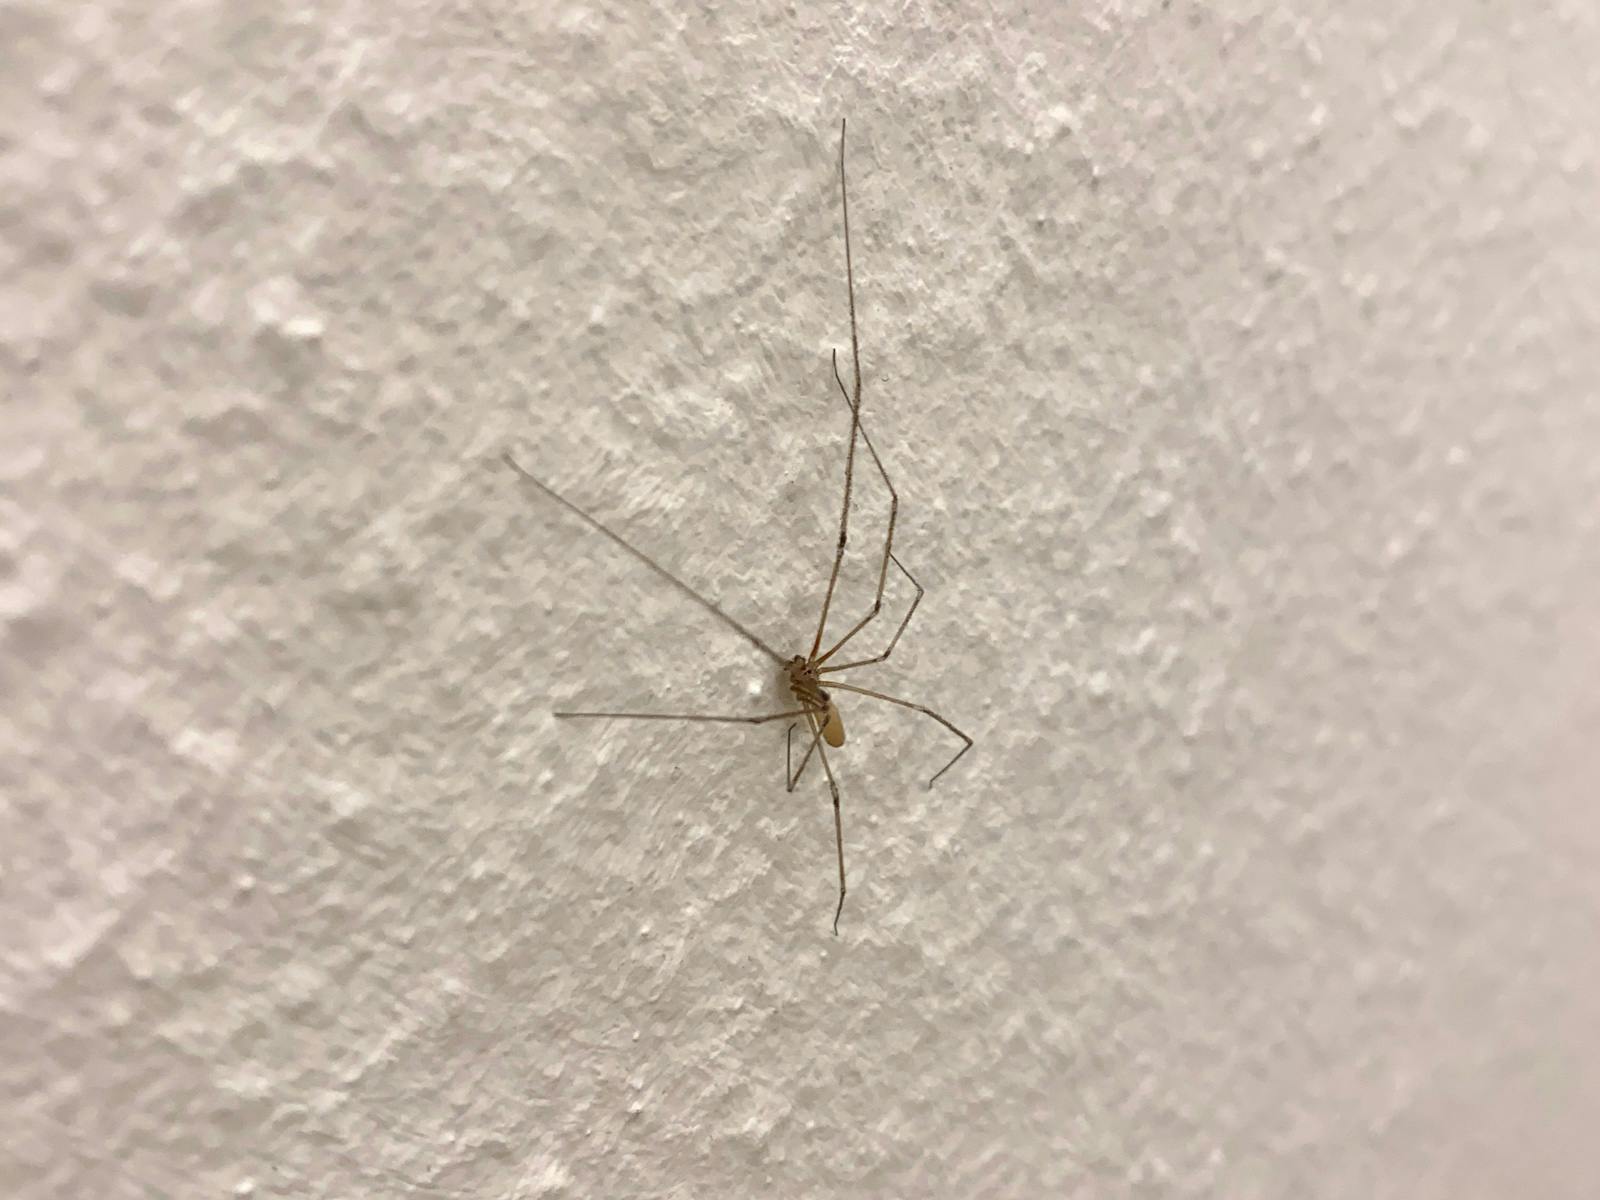 A light brown spider sits on white stucco wallpaper. It’s legs are delicate and segmented — the joints are dark brown.